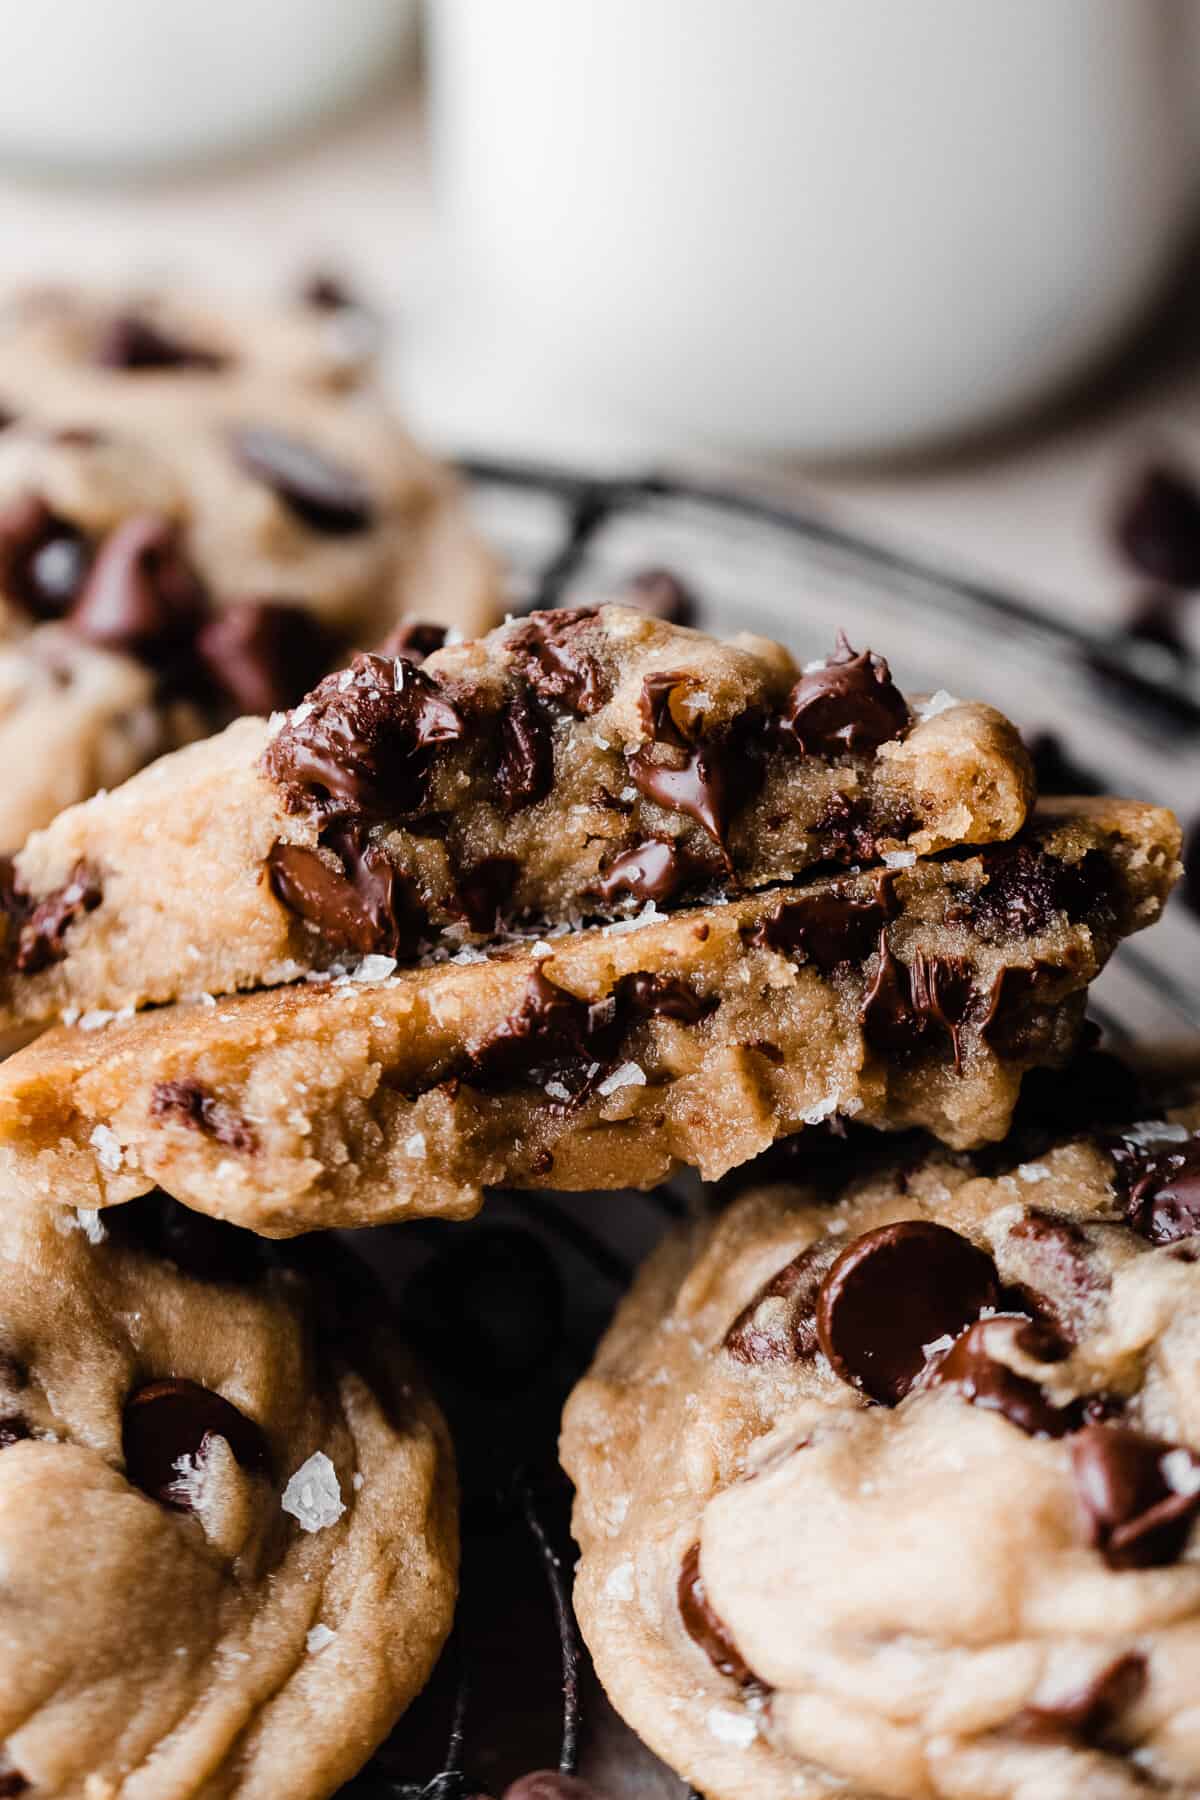 Two halves of an eggless chocolate chip cookie, showing their gooey insides and melty chocolate chips.